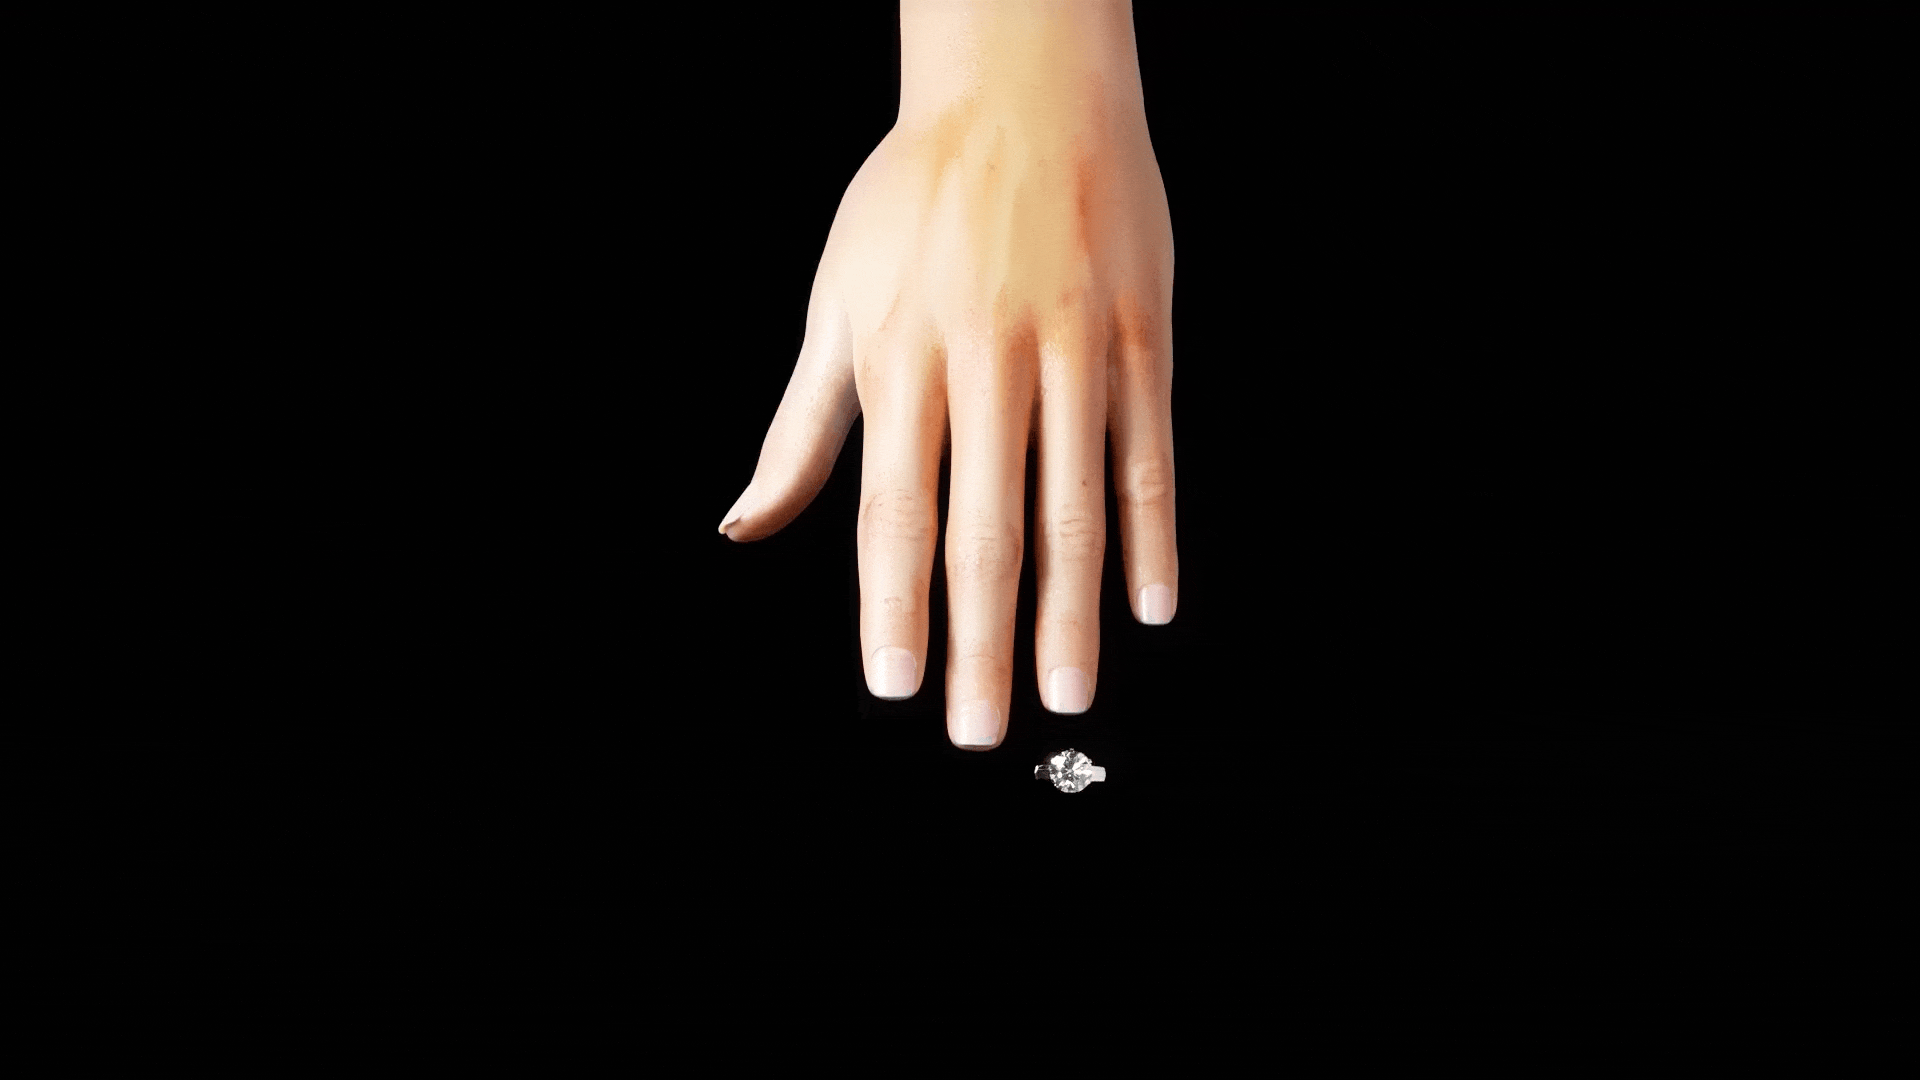 Animated gif of a hand with a People's diamond ring sliding on. The hand slides into a glove by Peoplest,the the diamond slides out of the ring slit in the glove.